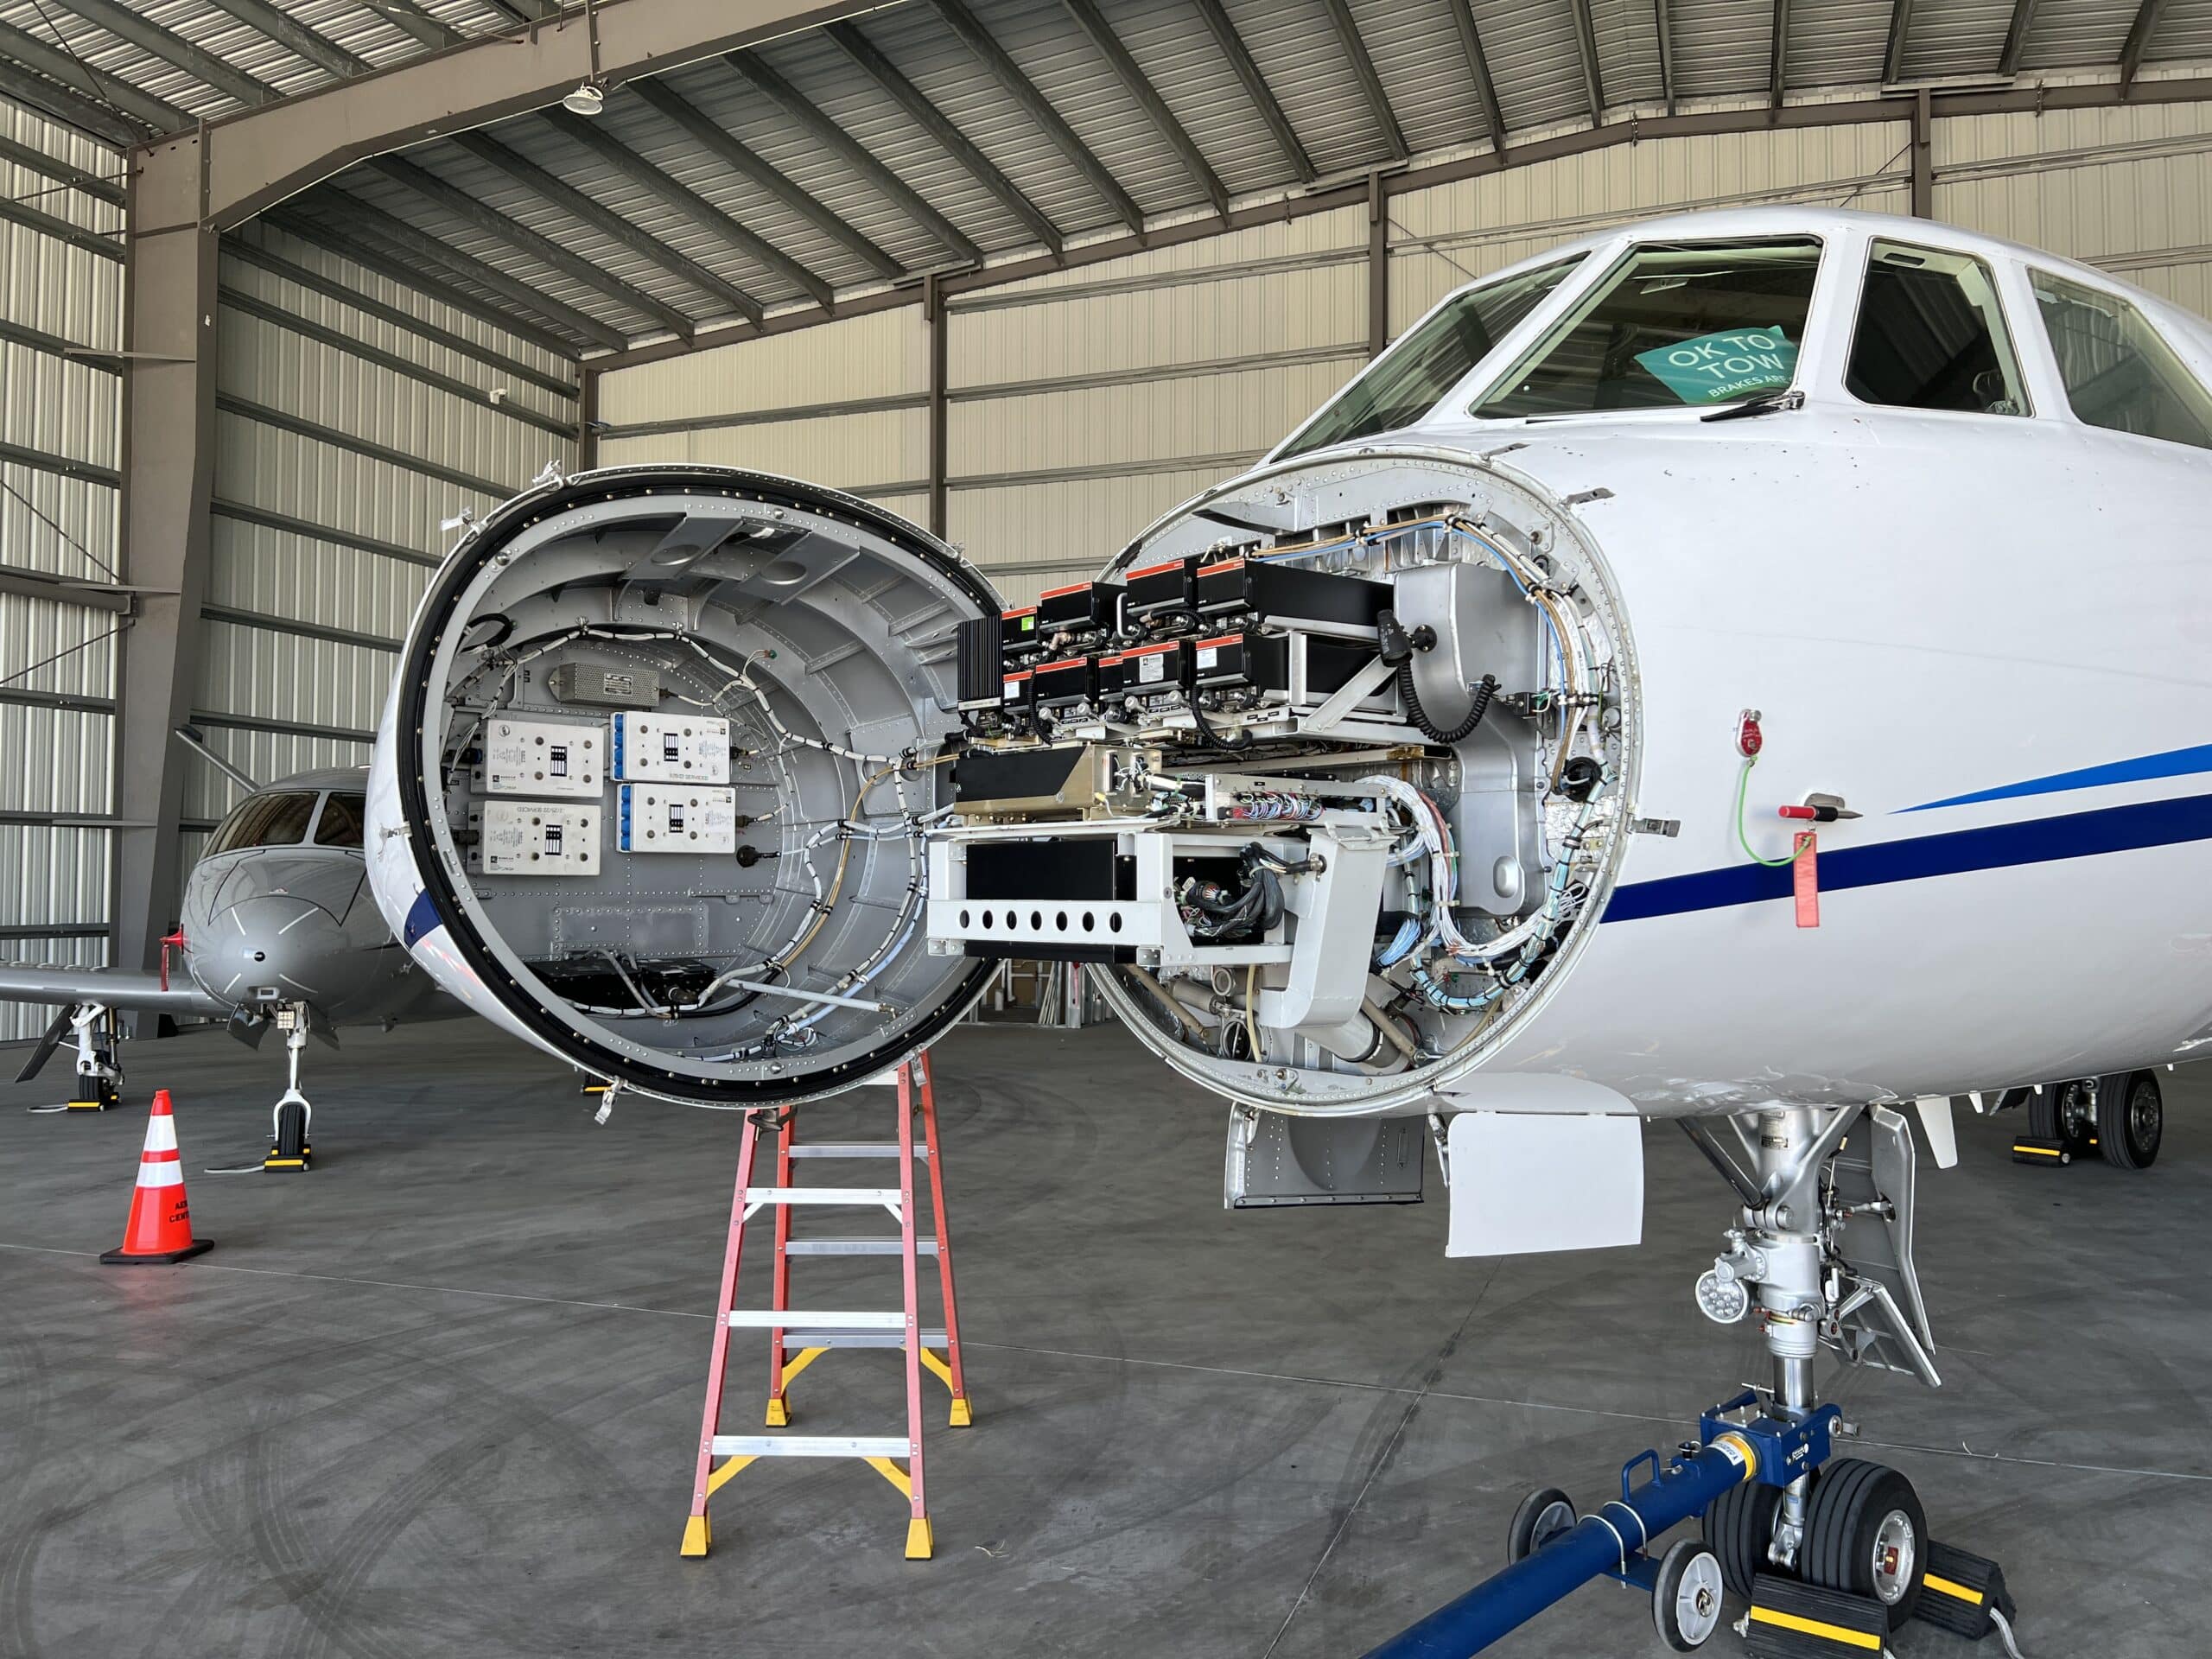 work in progress of repairs on the avionics system of a private jet